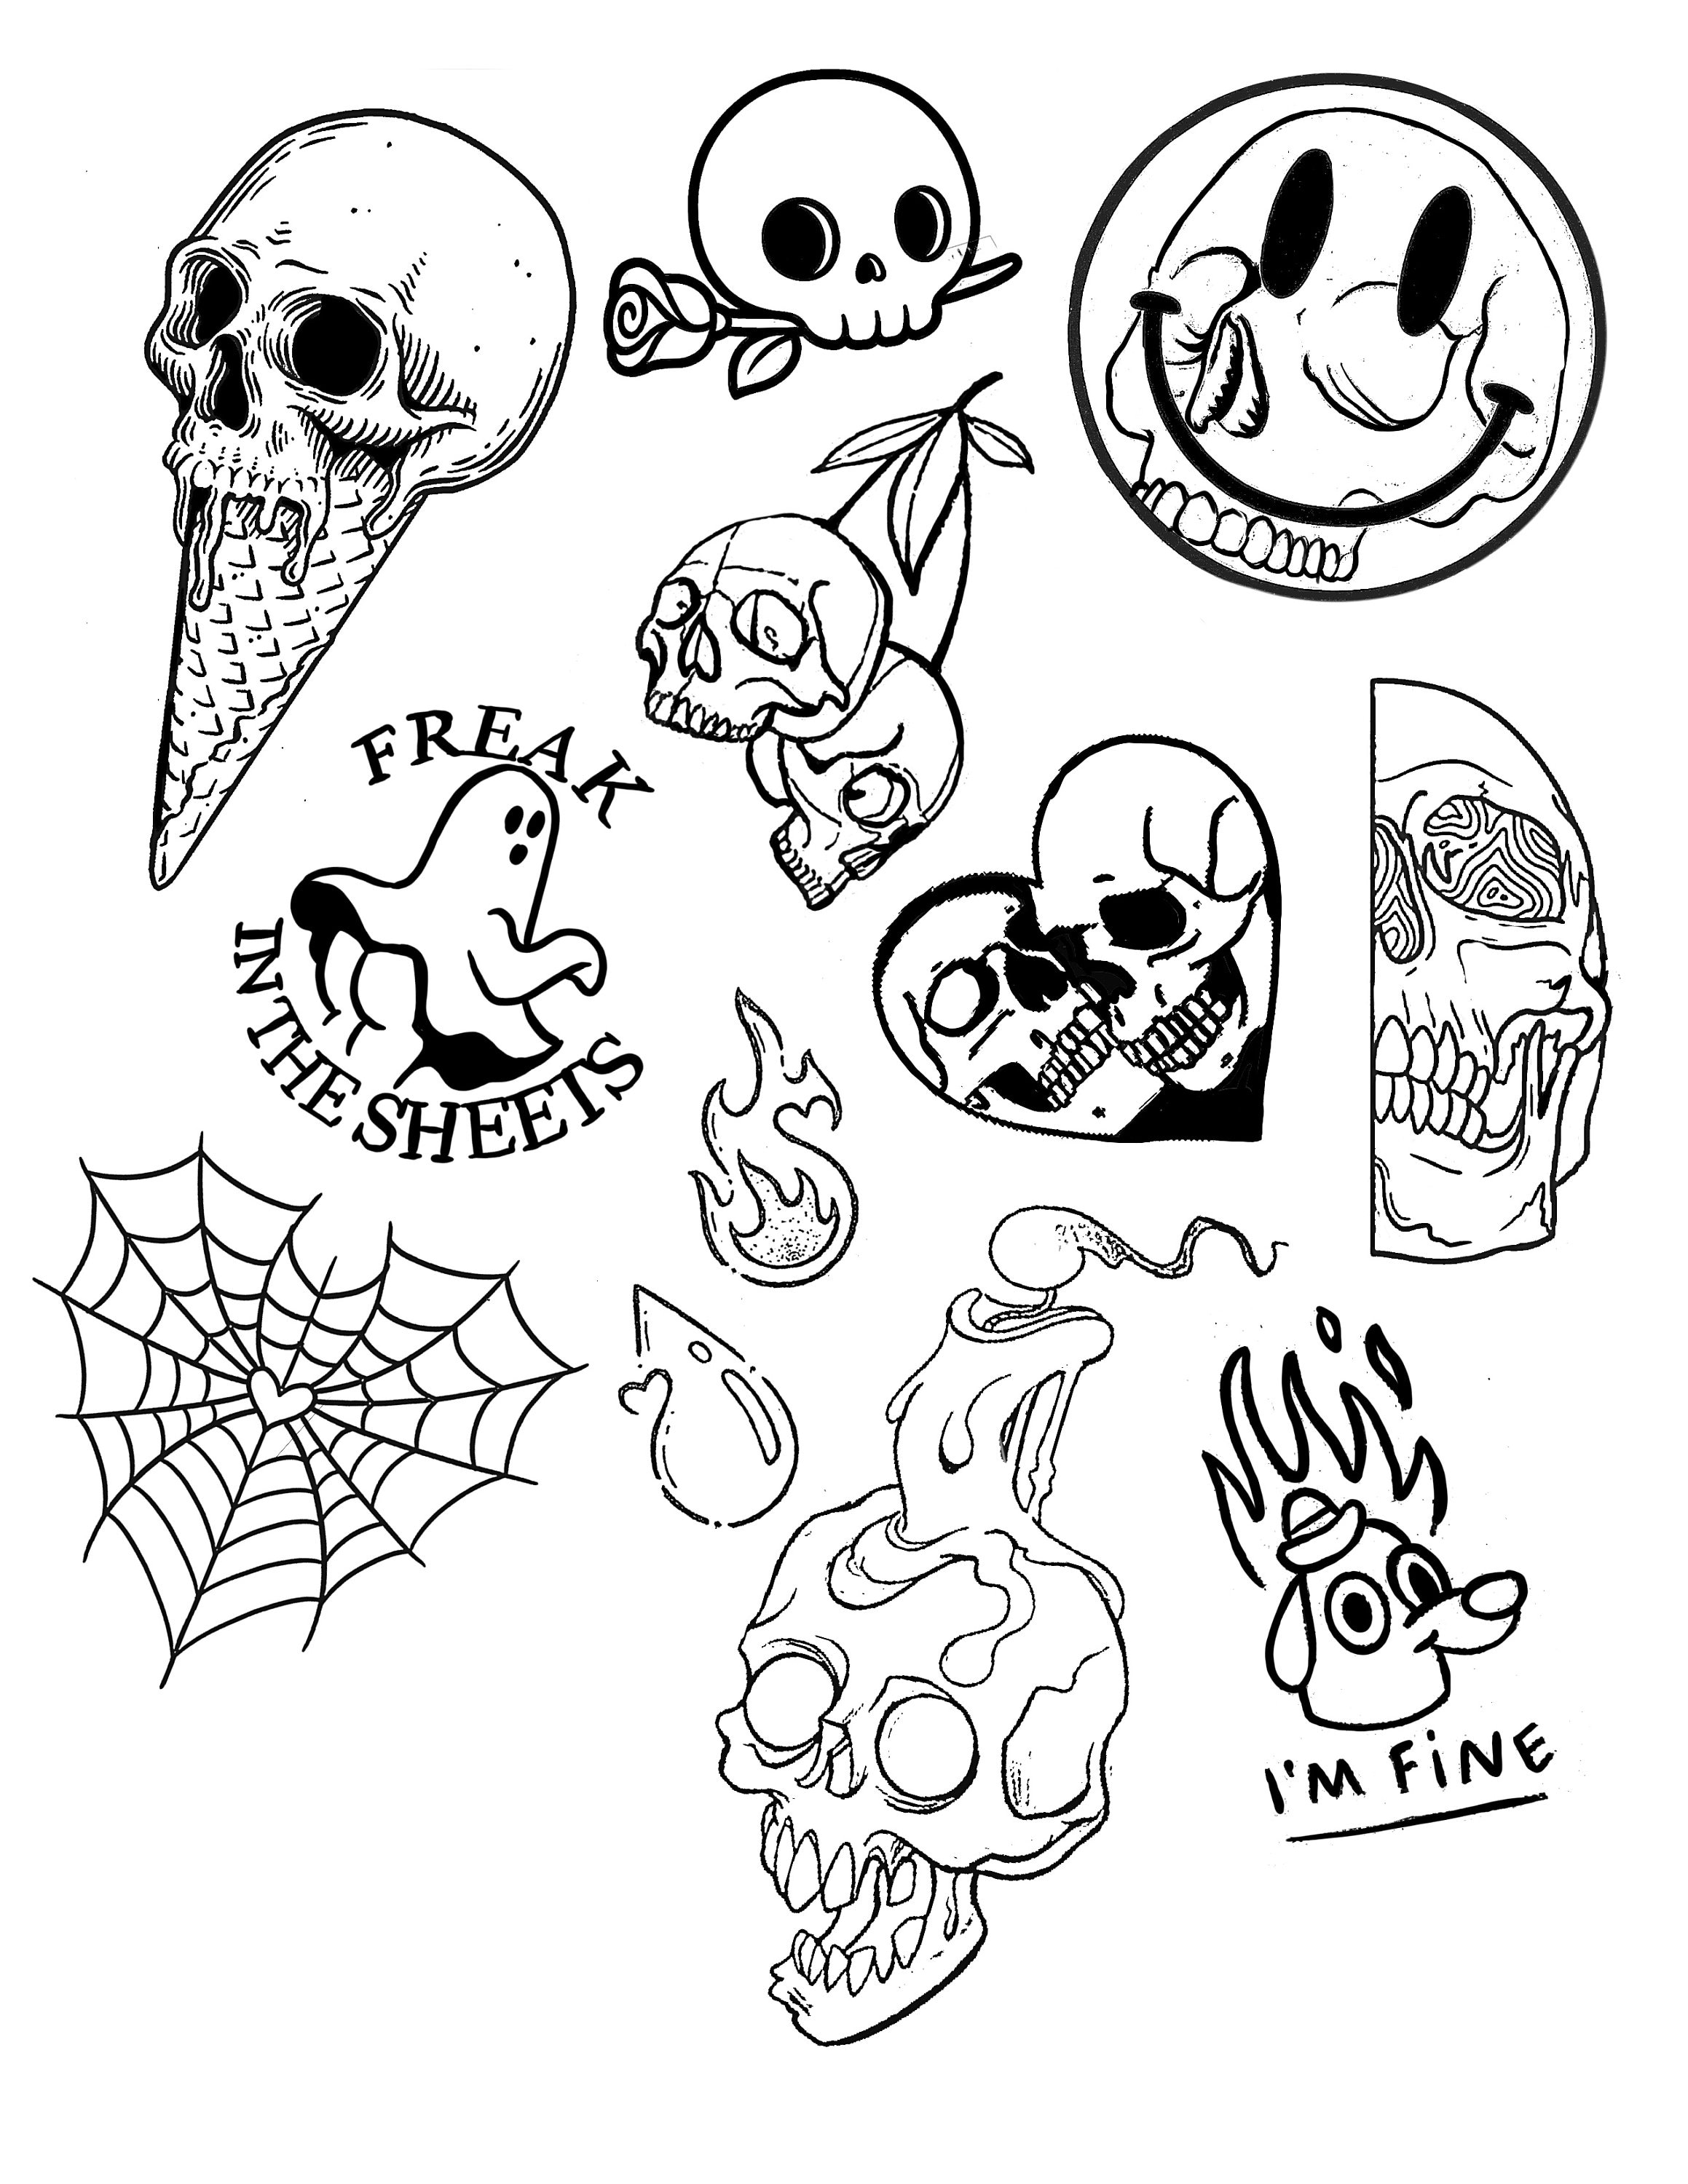 Friday the 13th Tattoo Flash, Spooky Tattoo Flash, Scary Movies Scary Art,  Procreate Brushes Stamp Sets - Etsy